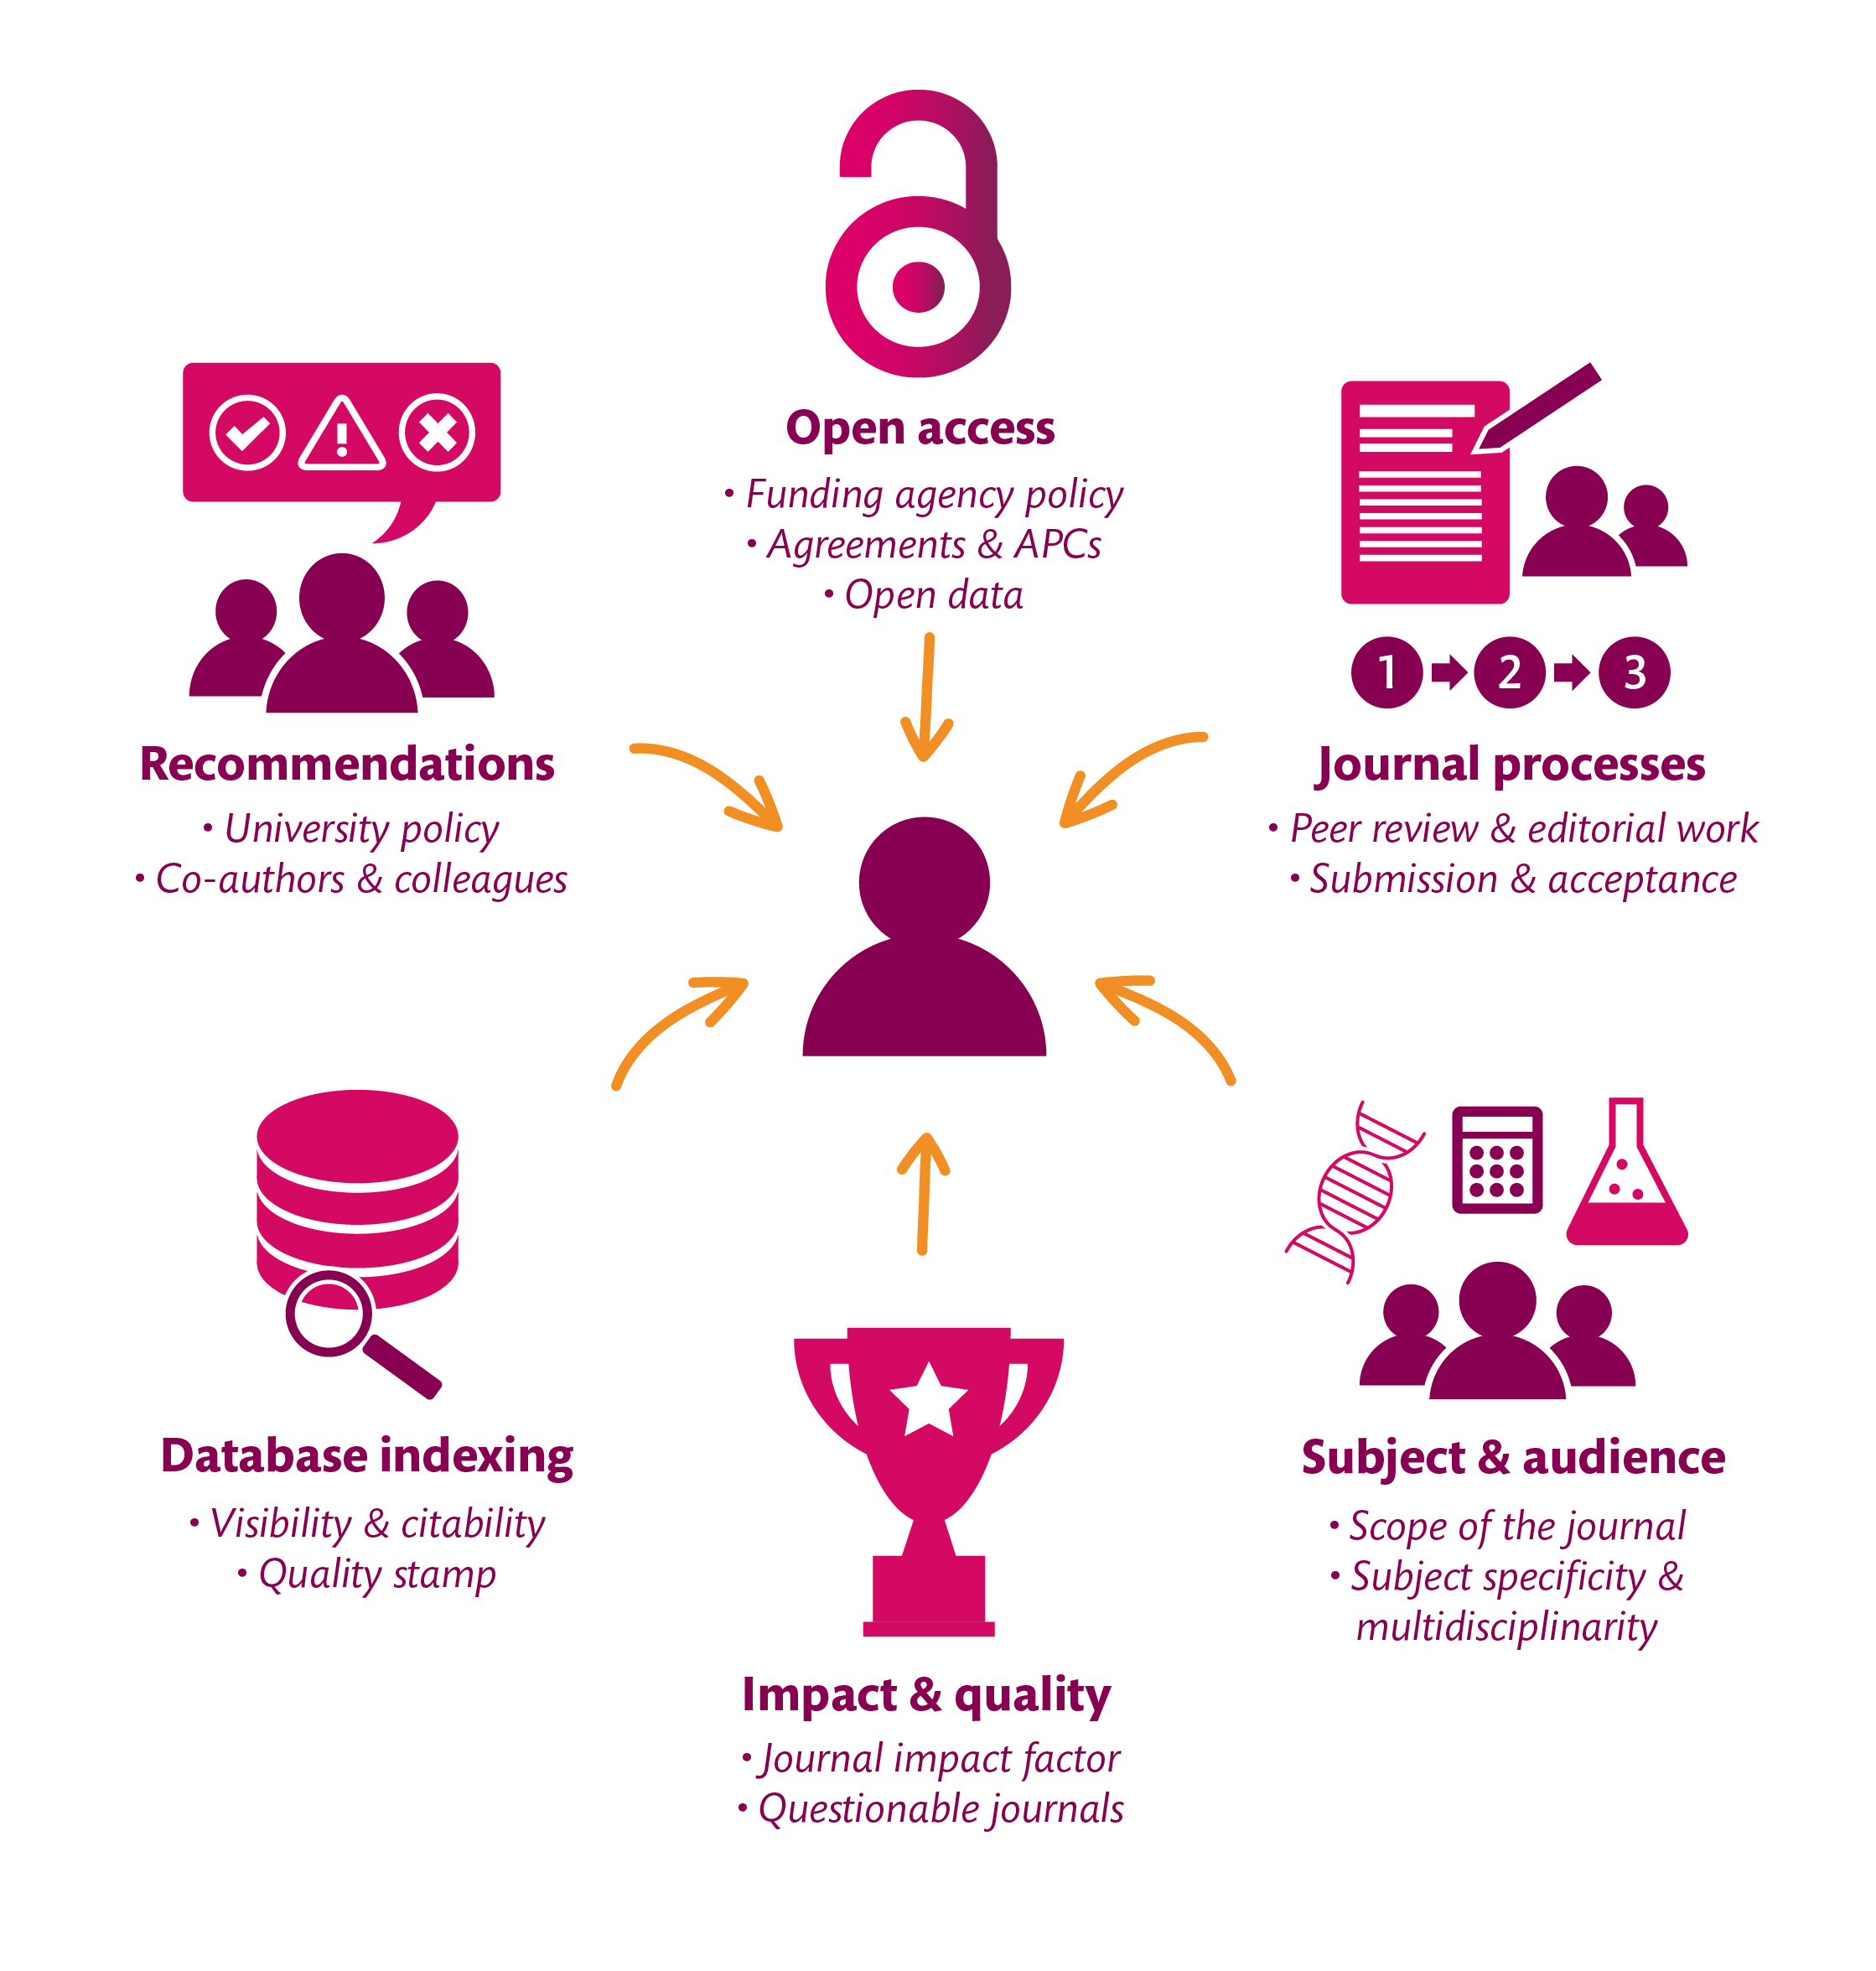 Factors that may influence the choice of journal. Six icons (factors) surround and point towards a centered icon of a human. The factors are open access, journal processes, subject & audience, impact & quality, database indexing and recommendations.